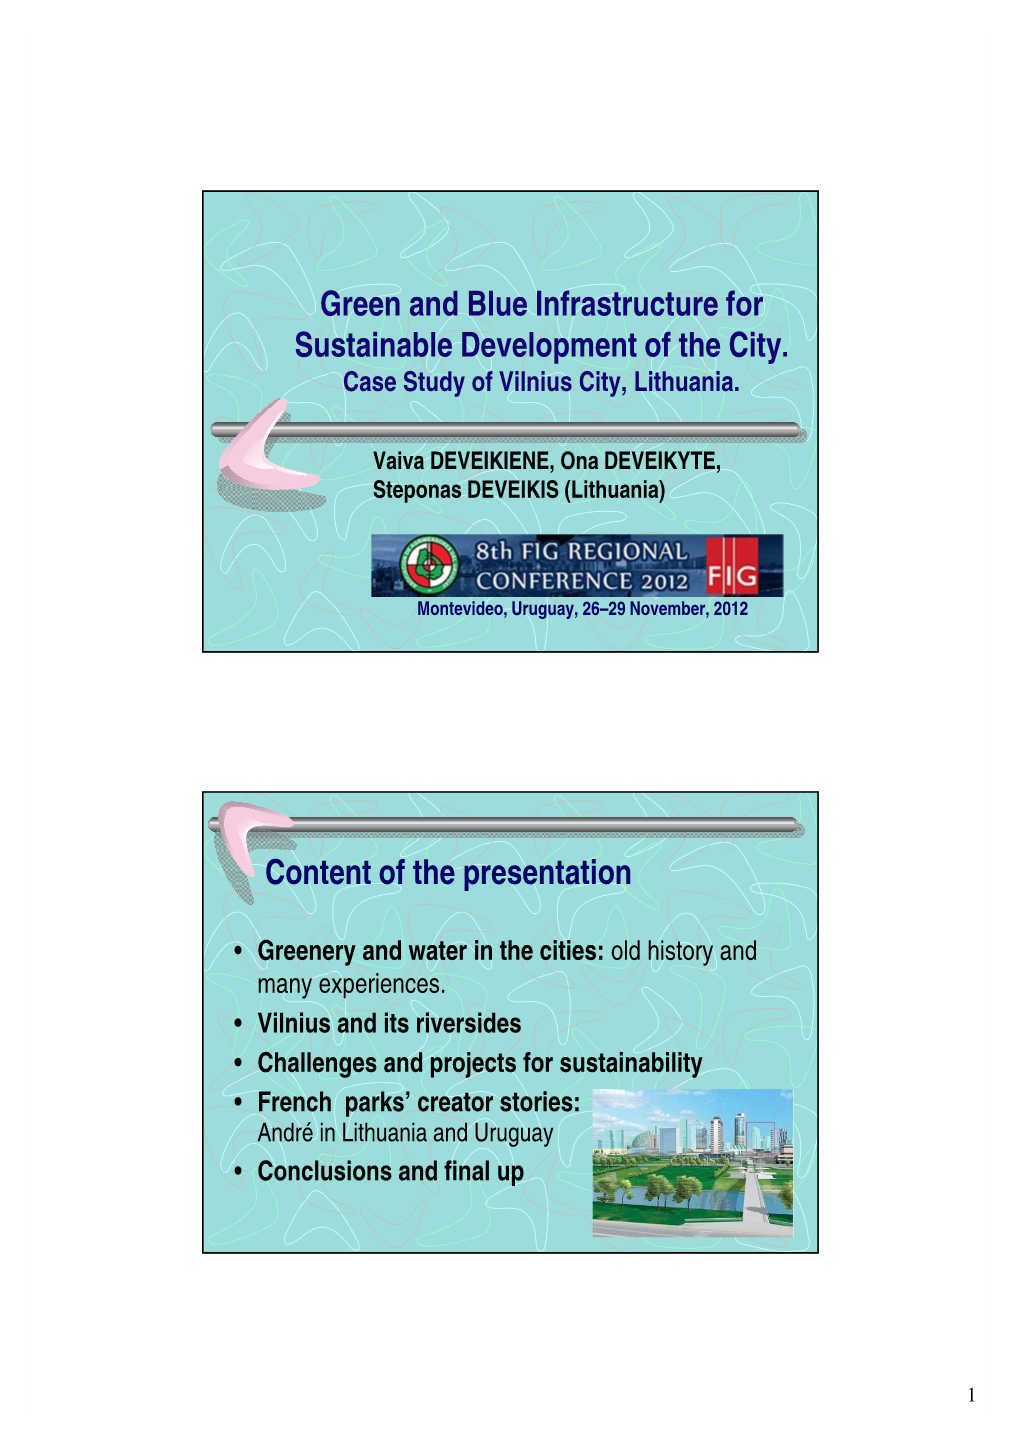 Green and Blue Infrastructure for Sustainable Development of the City